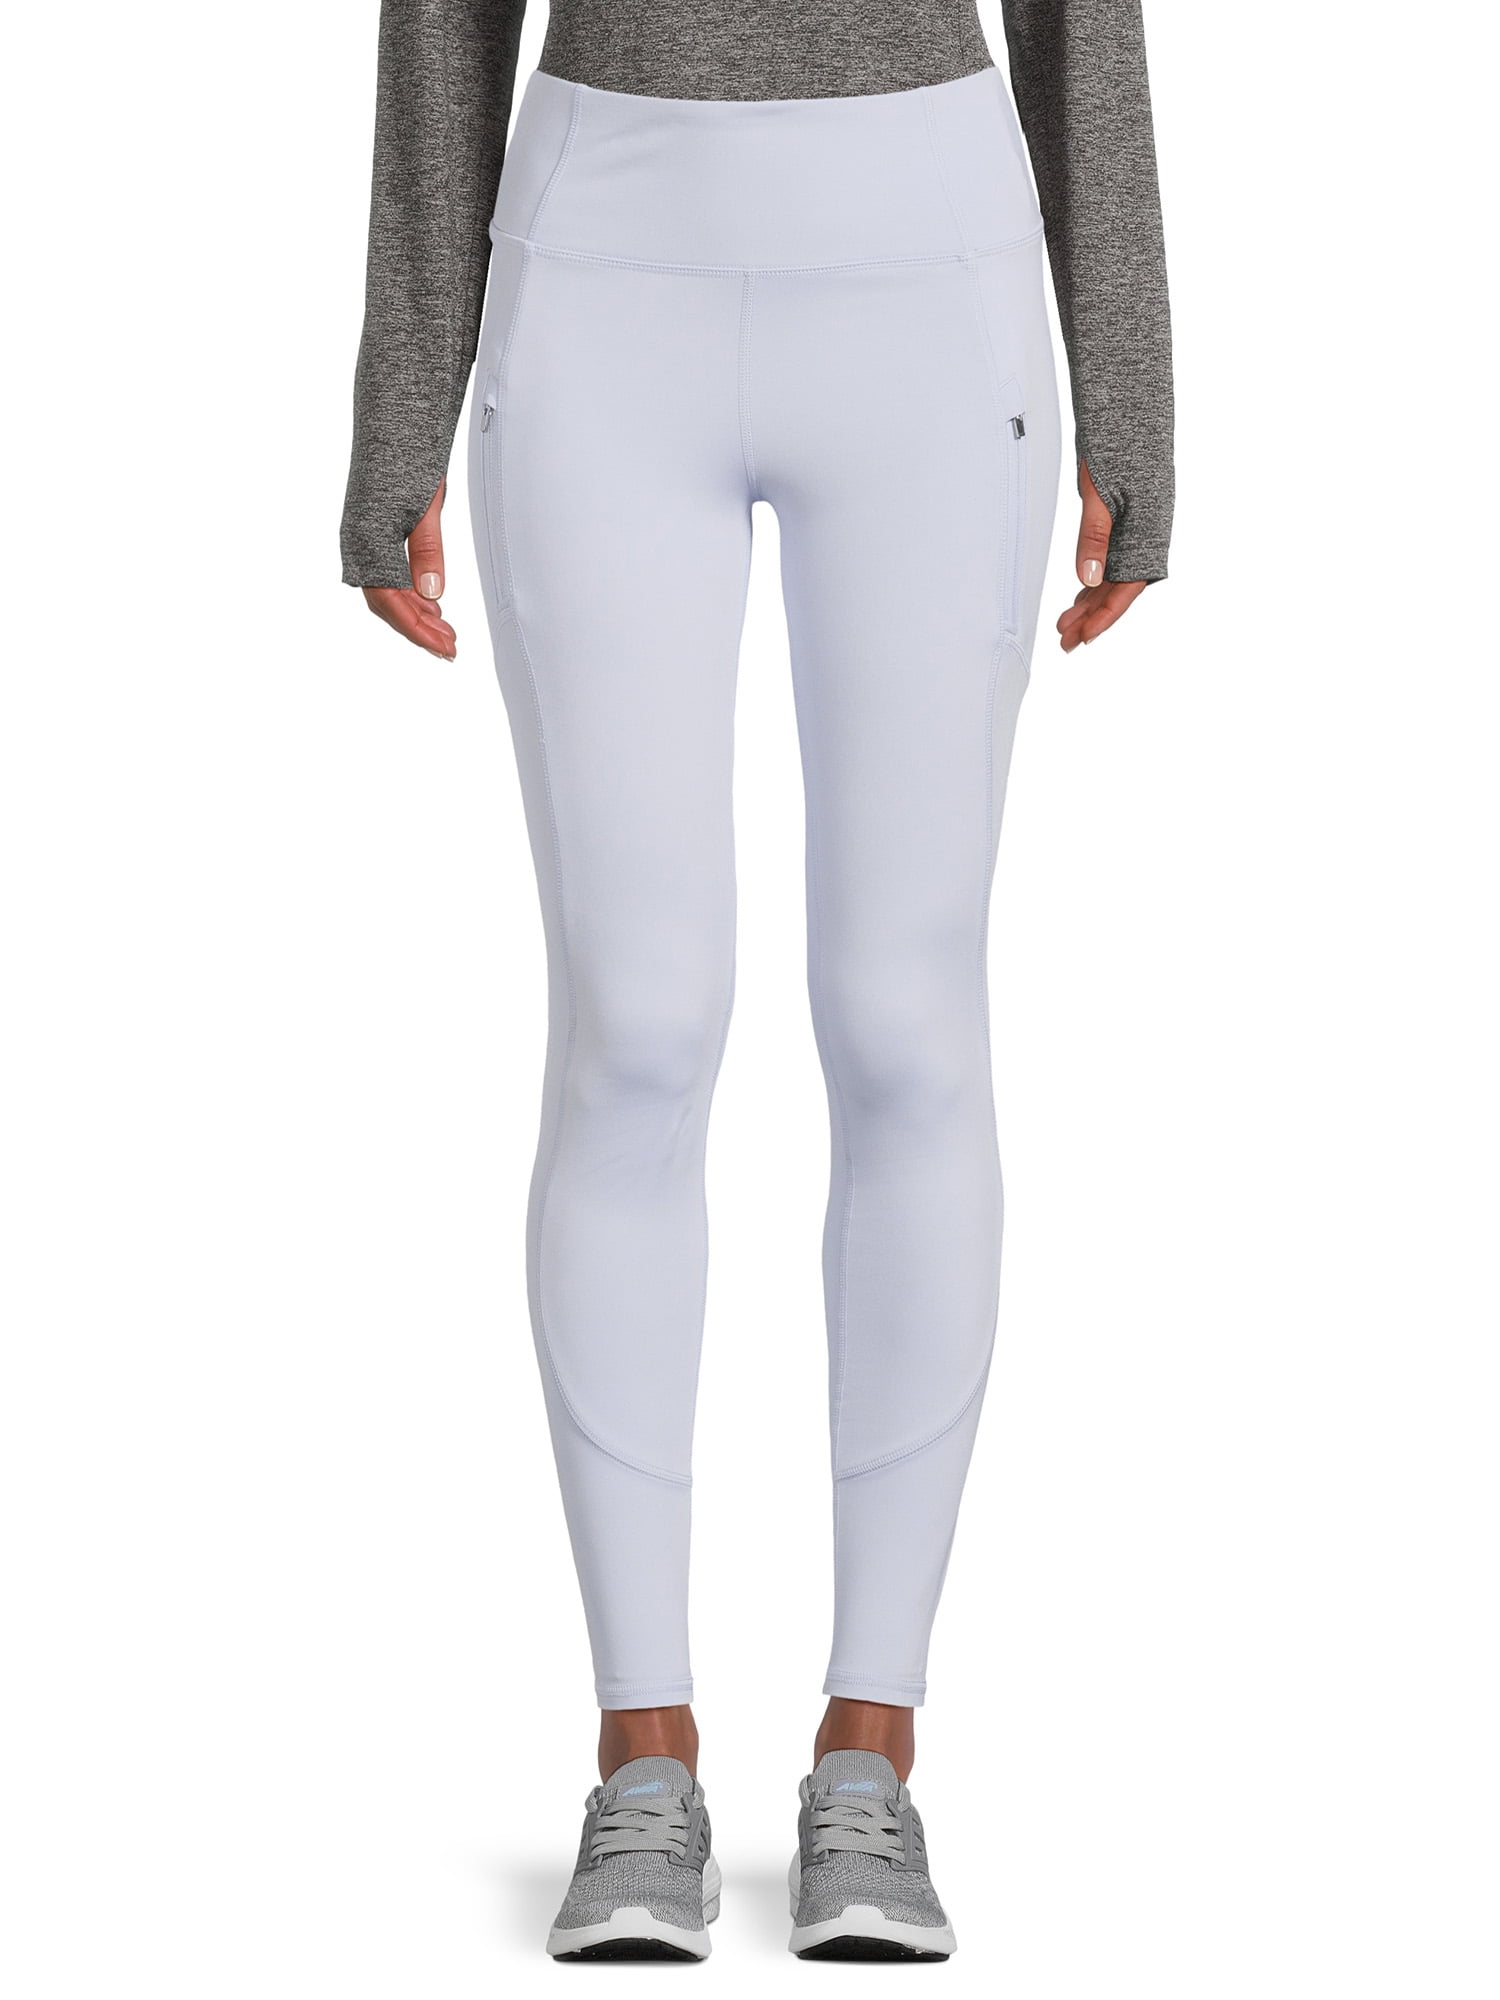 LIVA Fluid Fashion on X: Be chic yet comfortable with @brandprisma leggings.  Prisma leggings for women are made with Nature based fabrics by LIVA. Look  for the LIVA tag every time you